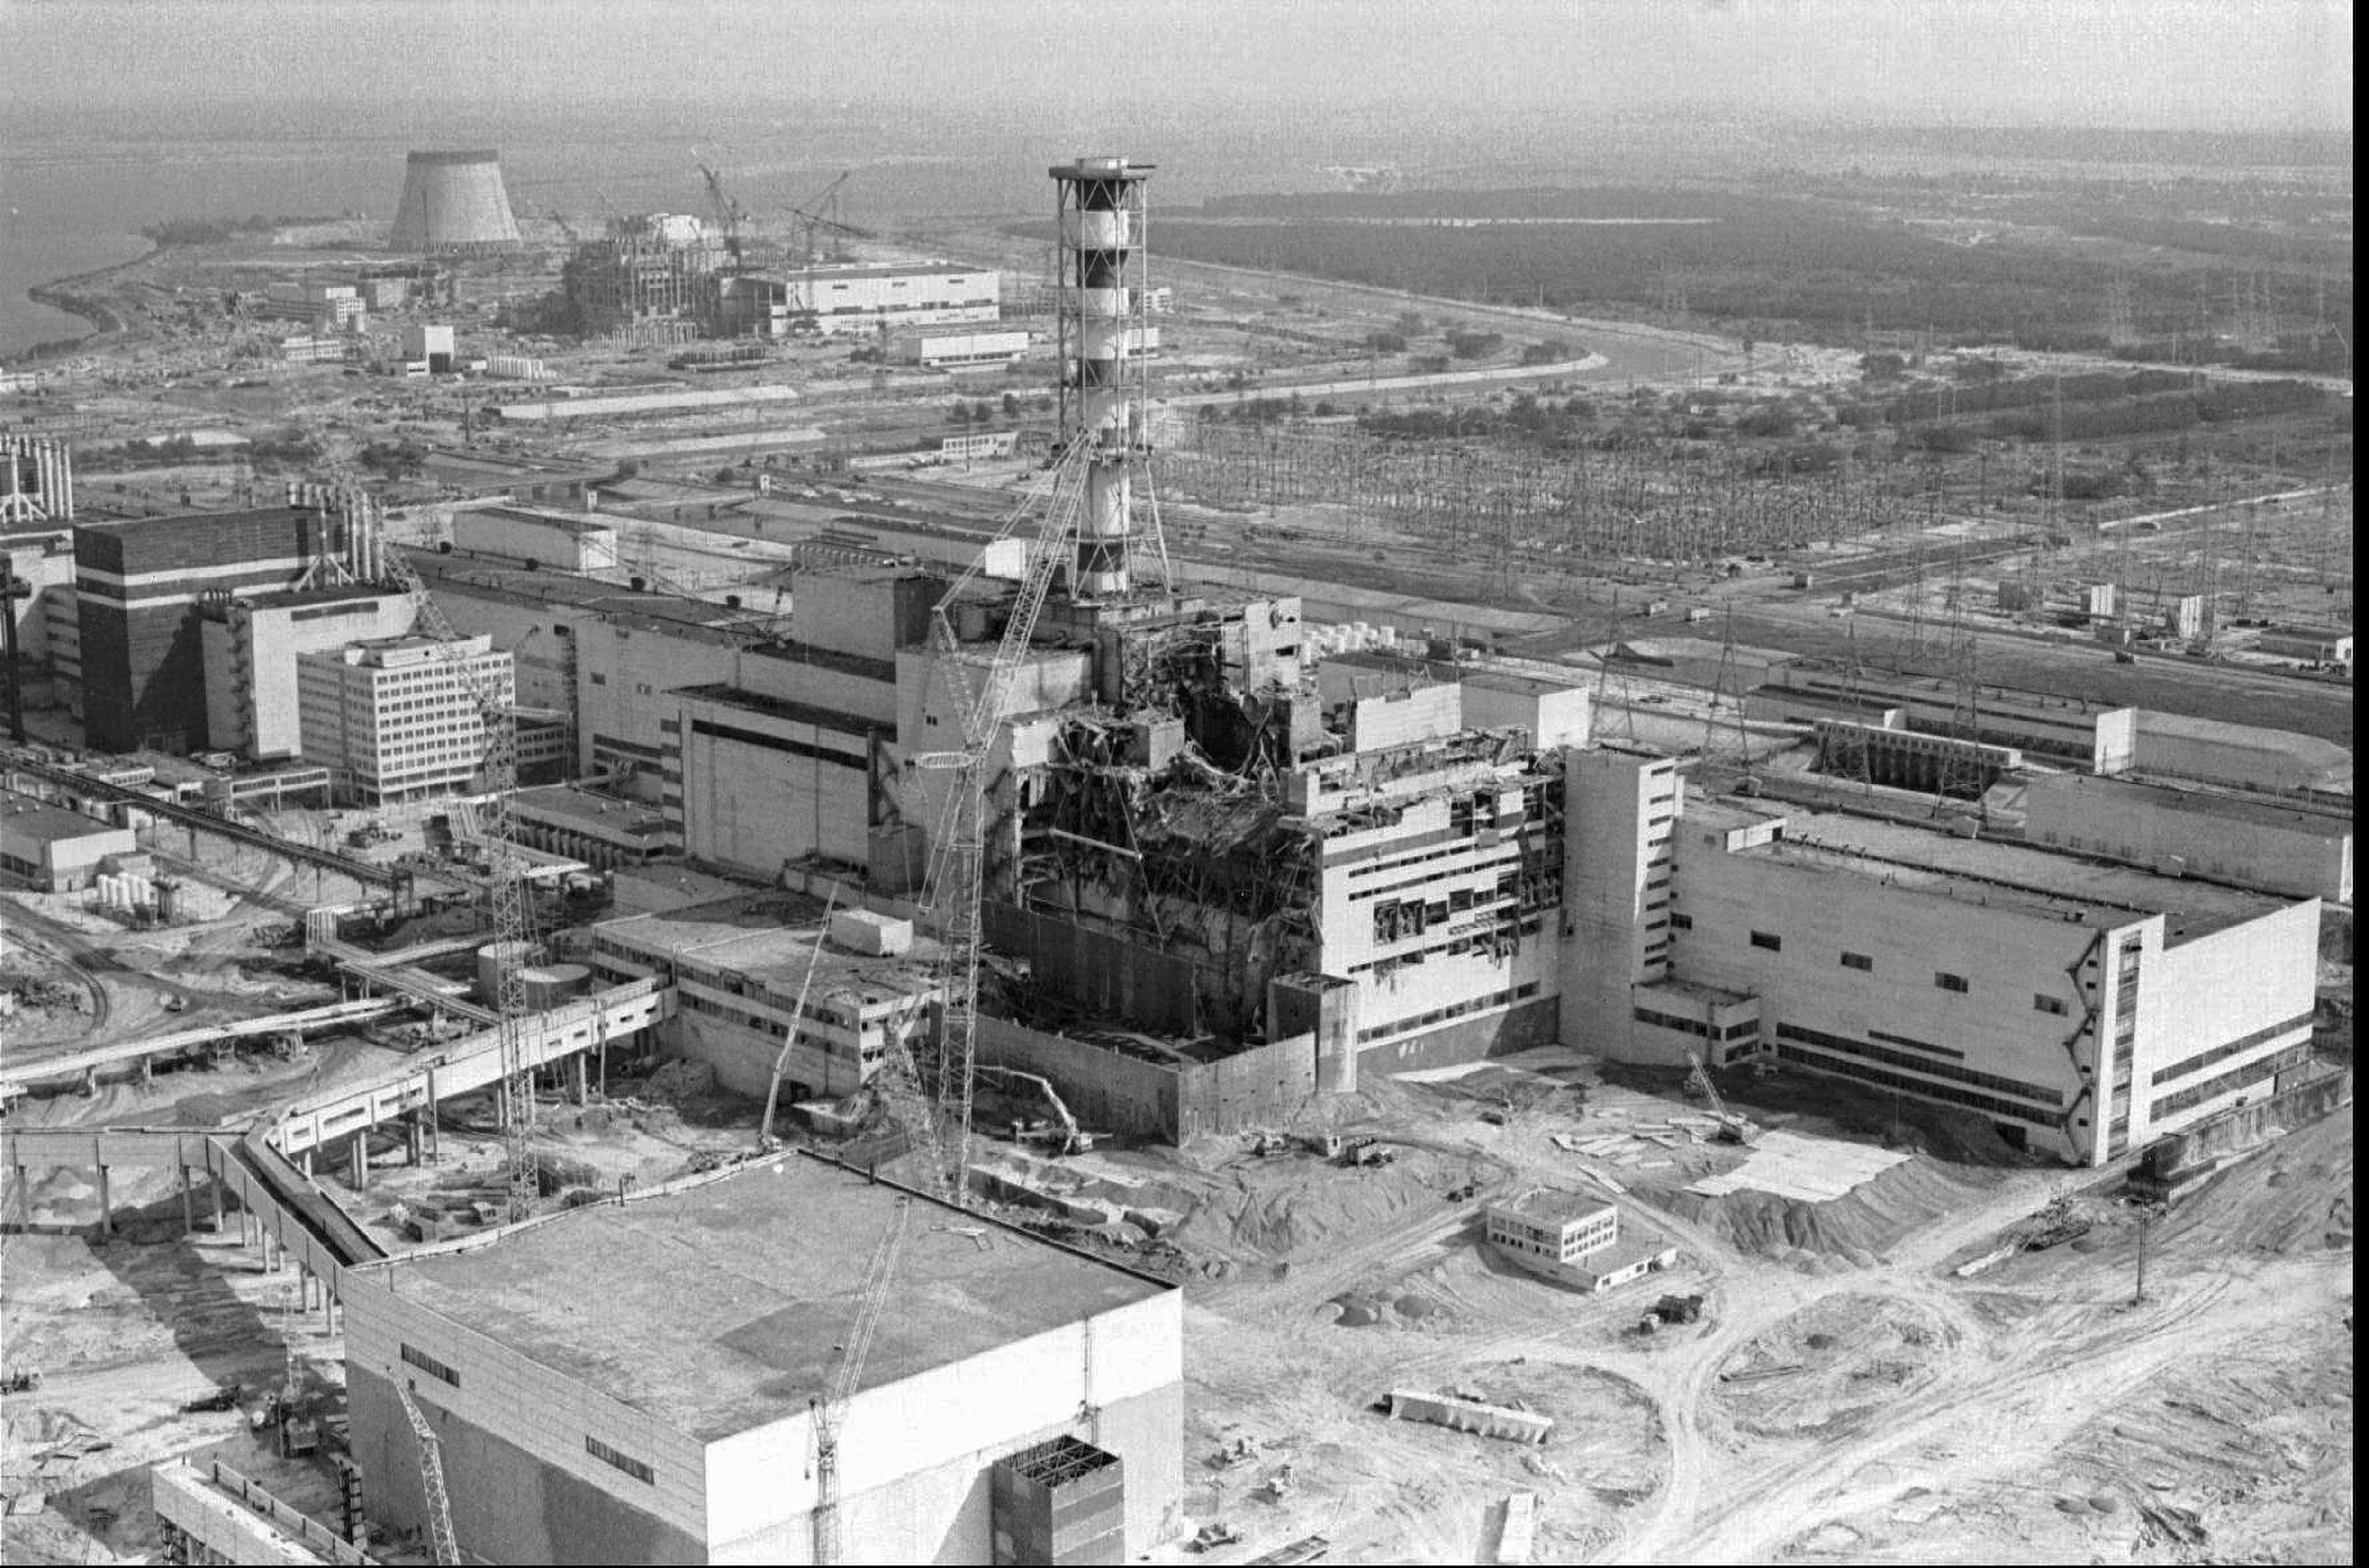 The Chernobyl nuclear plant showing damage from an explosion and fire in reactor four in 1986